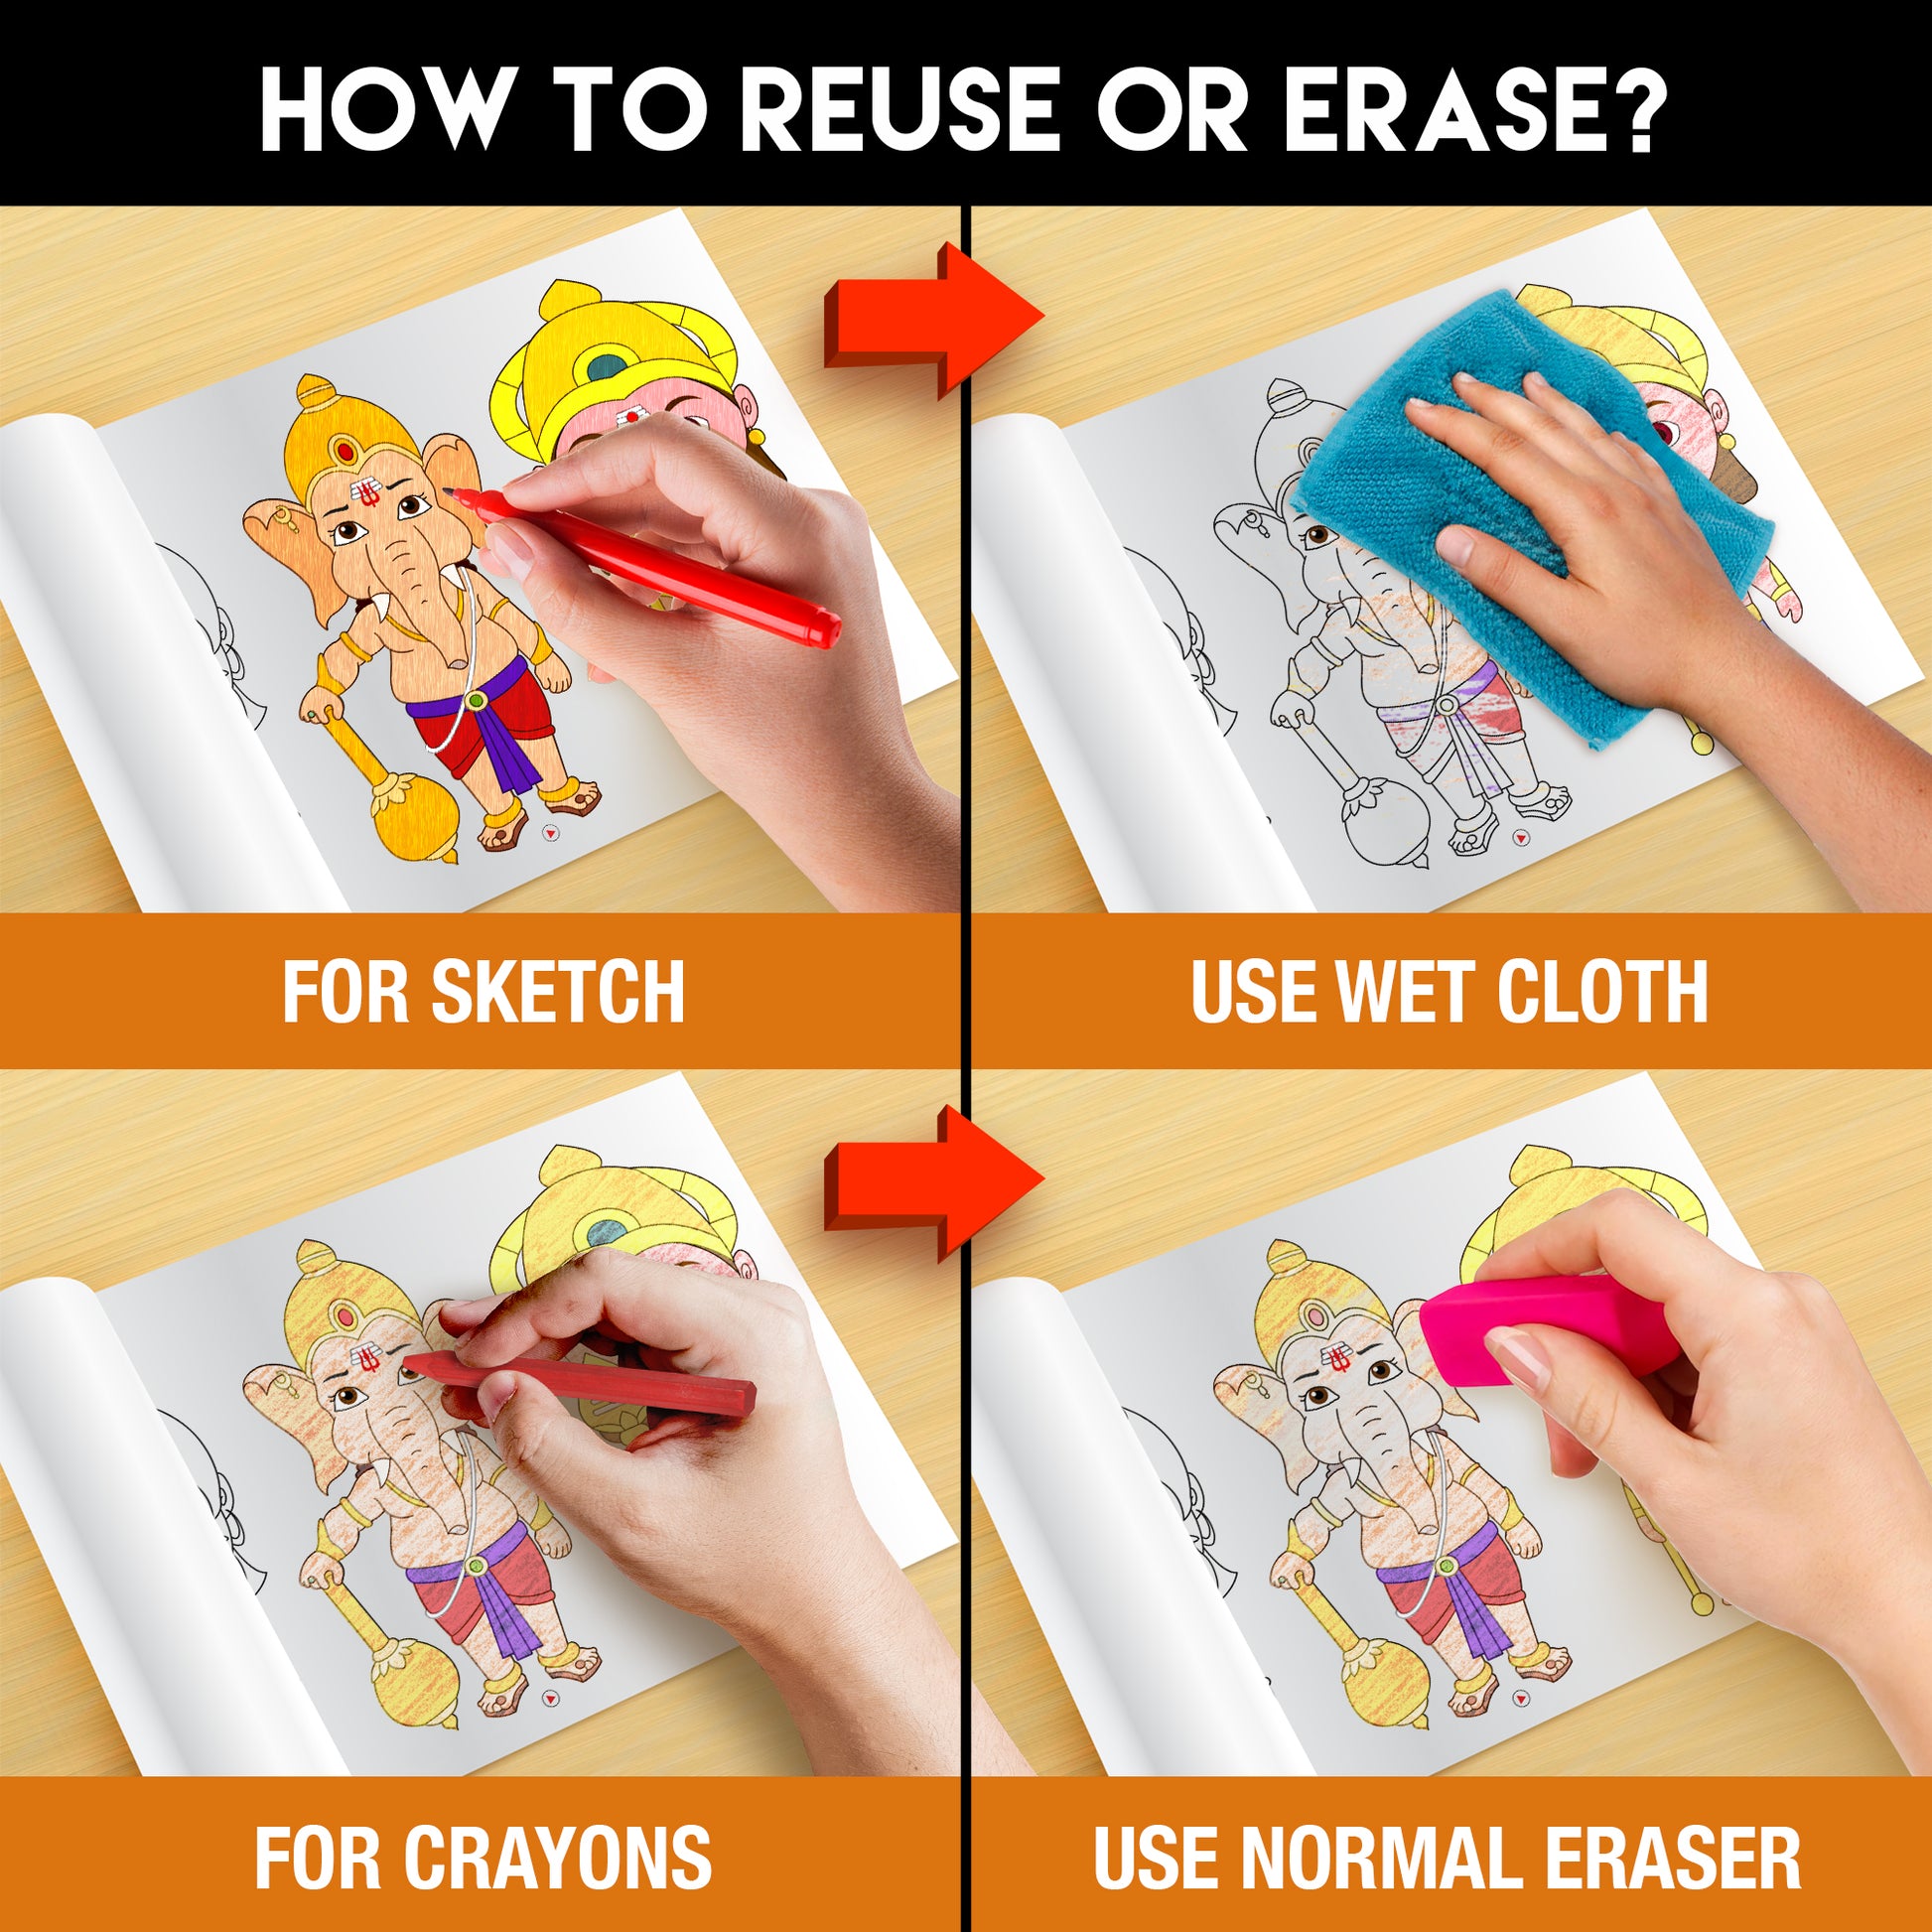 The image has a orange background with four pictures demonstrating how to reuse or erase: the first picture depicts sketching on the hindu gods sheet, the second shows using a wet cloth to remove sketches, the third image displays crayons colouring on the hindu gods sheet, and the fourth image illustrates erasing crayons with a regular eraser.